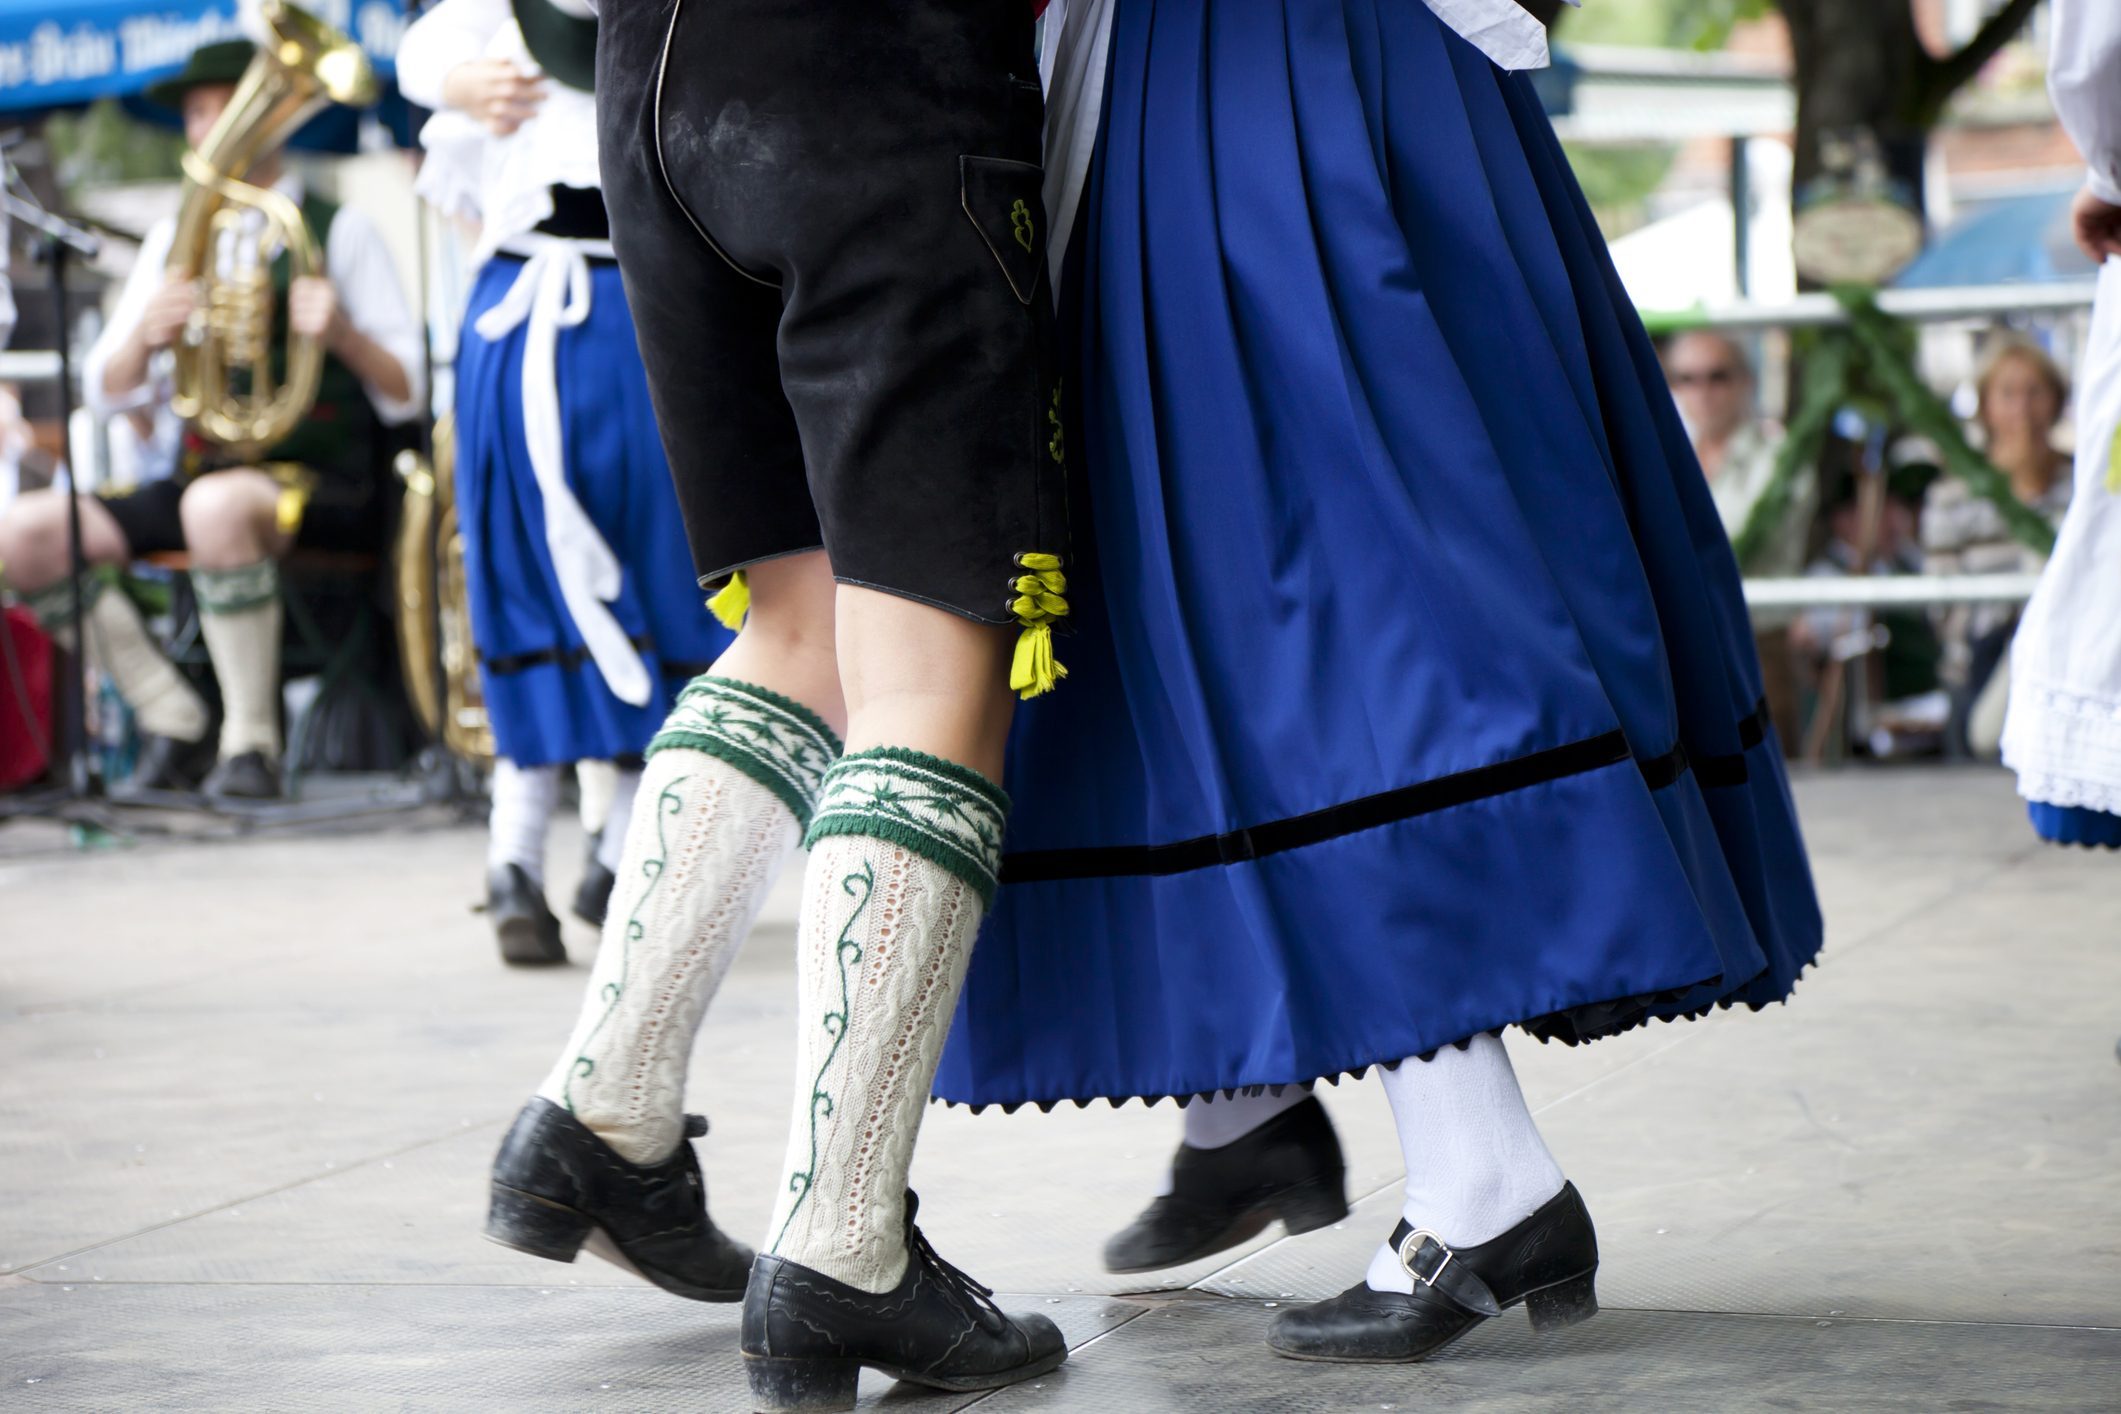 Bavarian couple in traditional outfits at Beer Fest dance